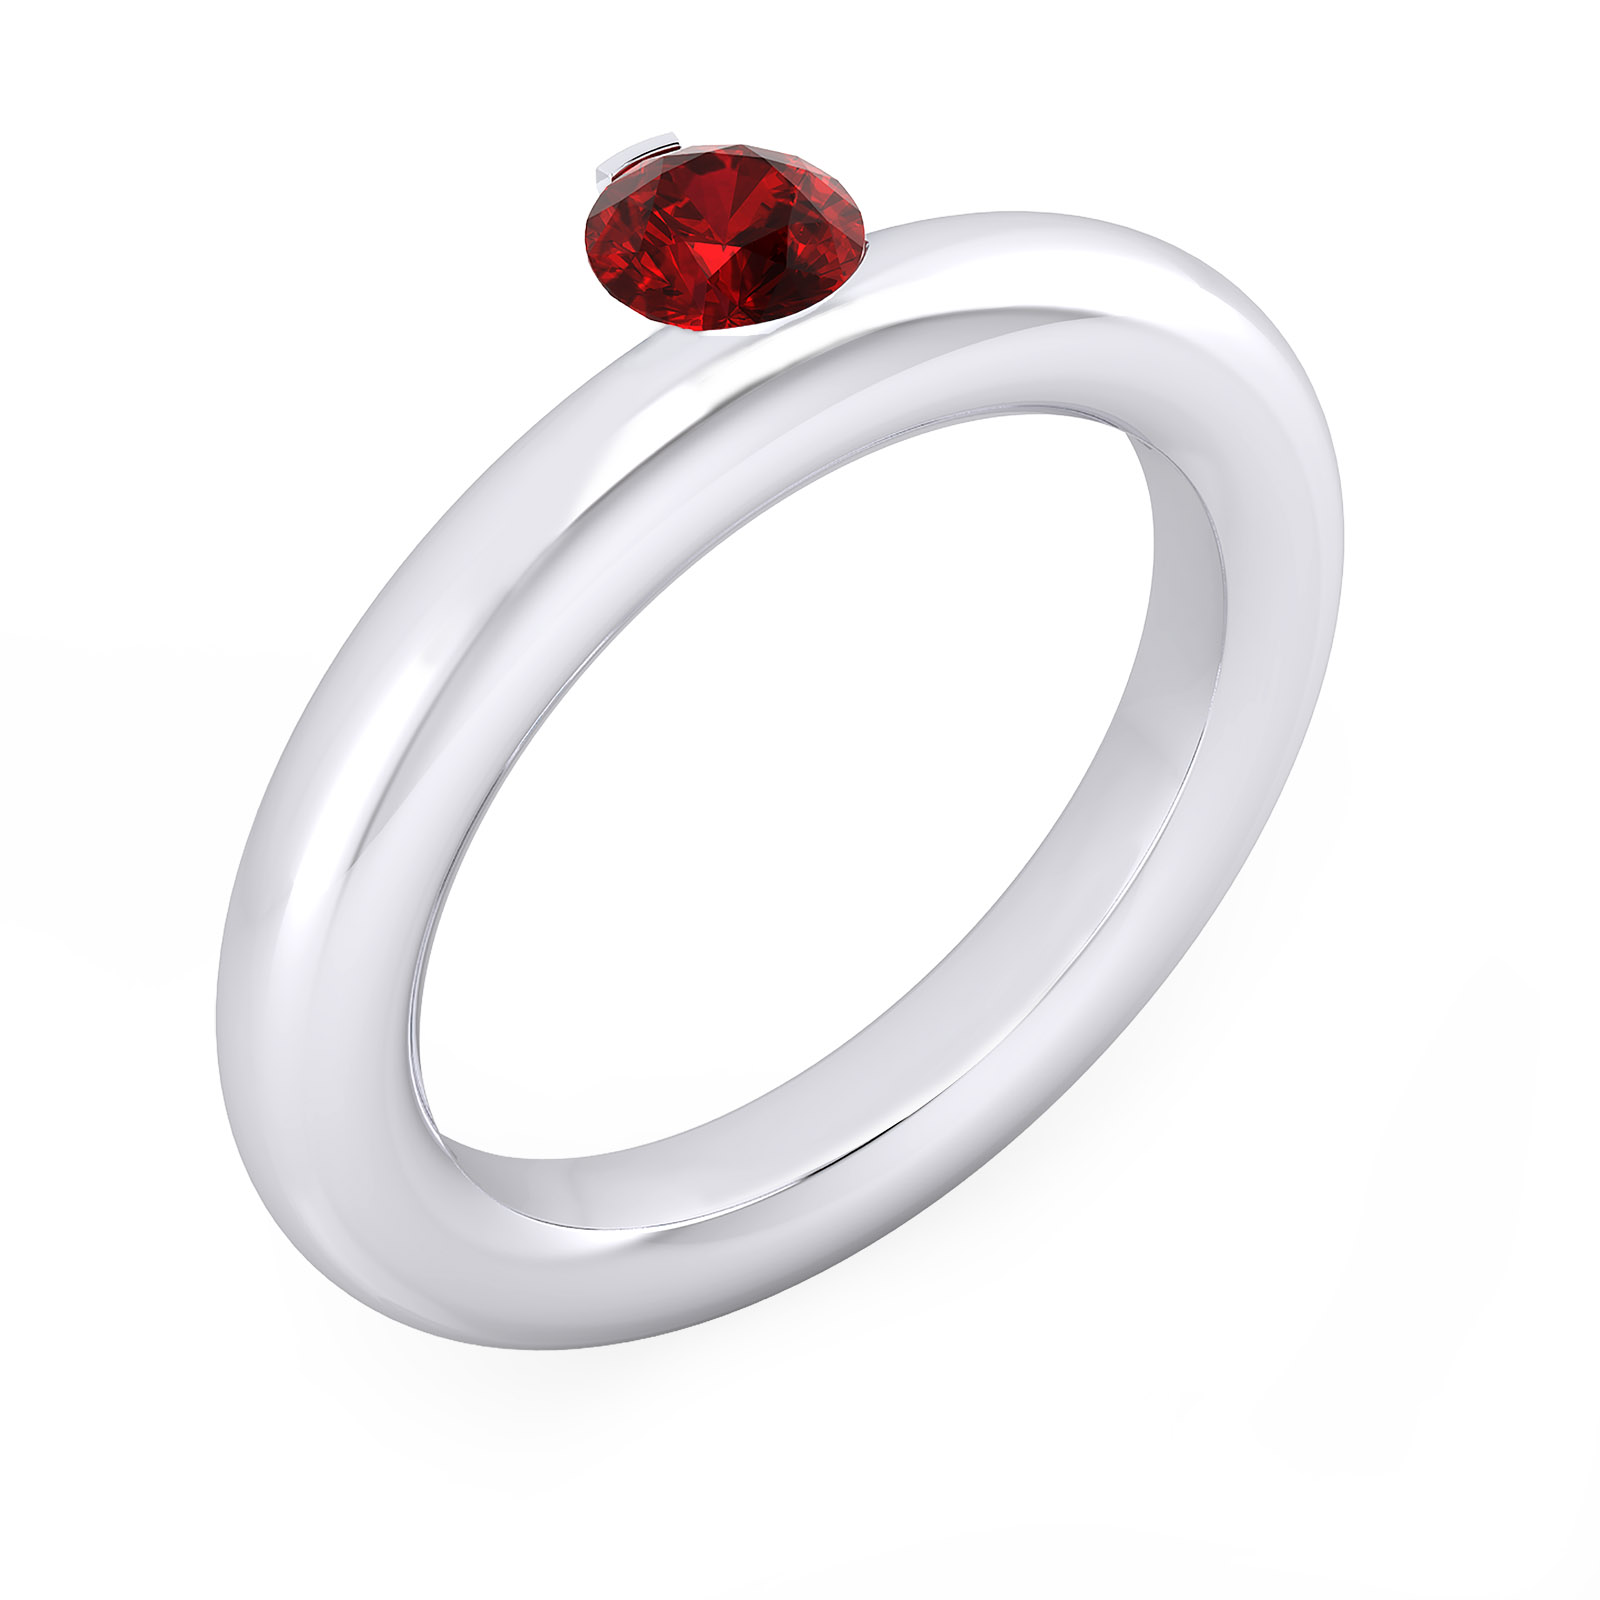 White gold engagement rings natural burma ruby